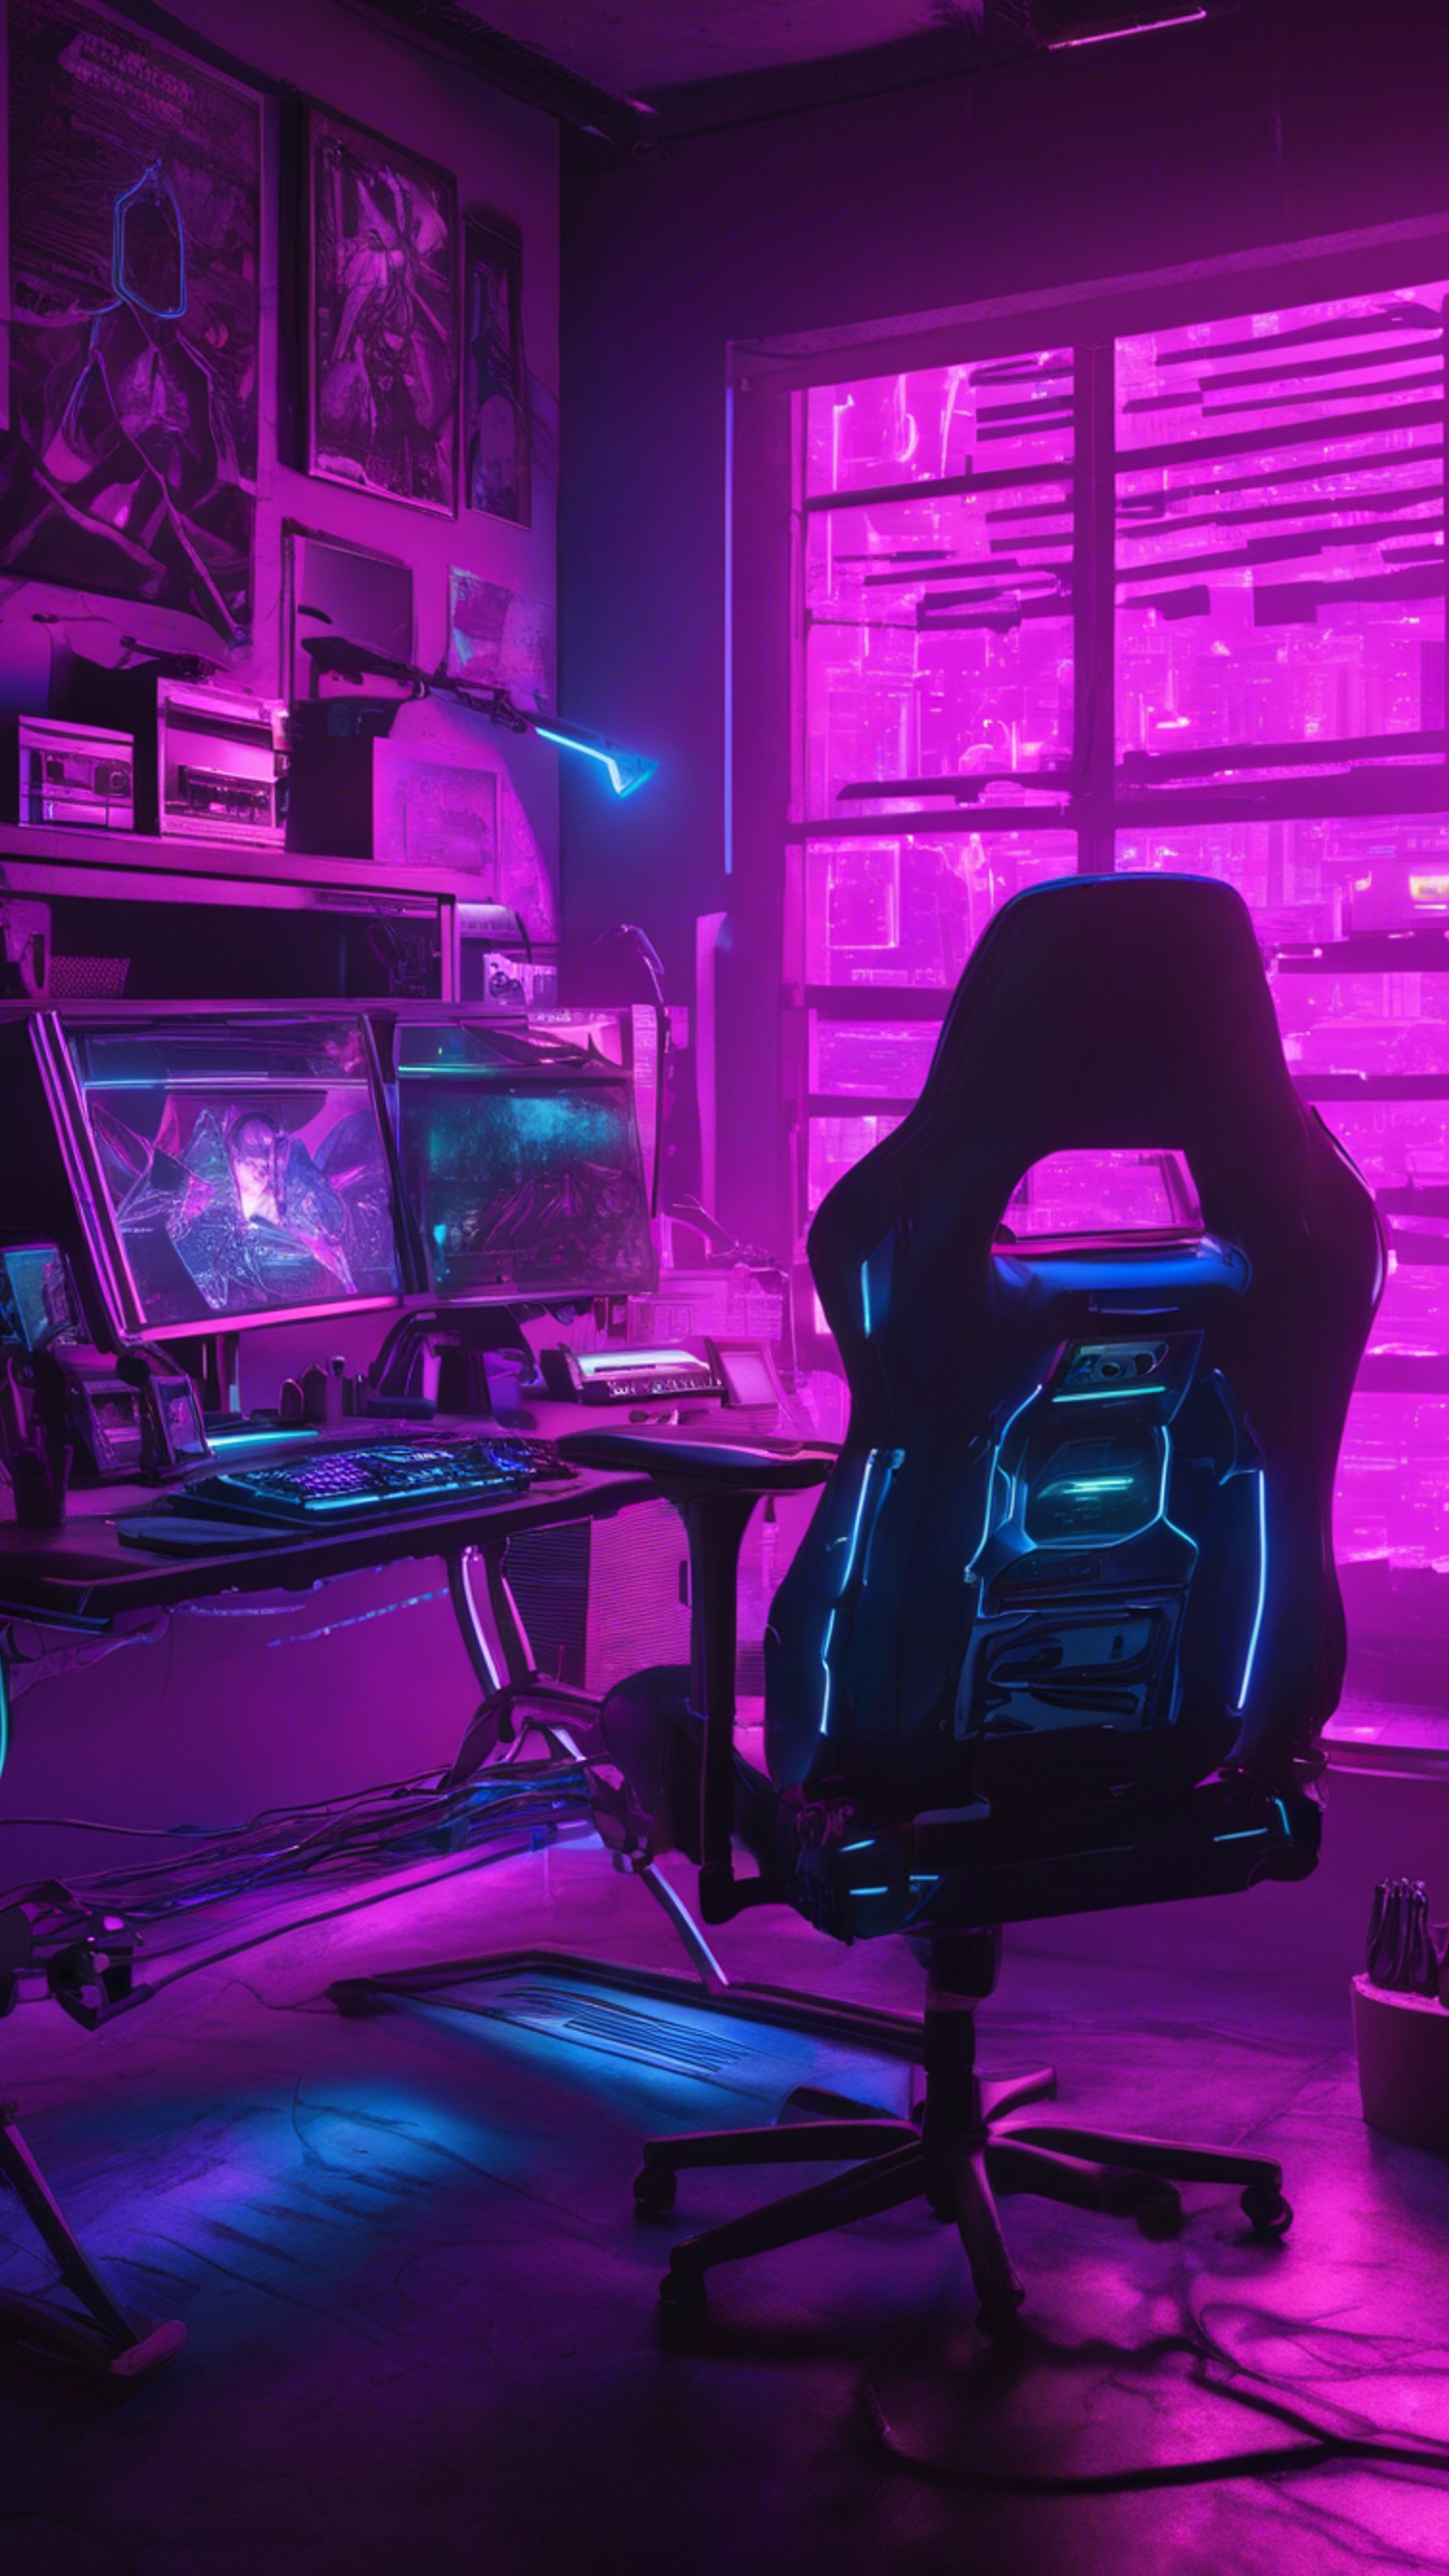 A modern gaming room lit with neon purple lights, showing an advanced gaming set up on a sleek desk. Behang[eb087c215e784f138c4c]